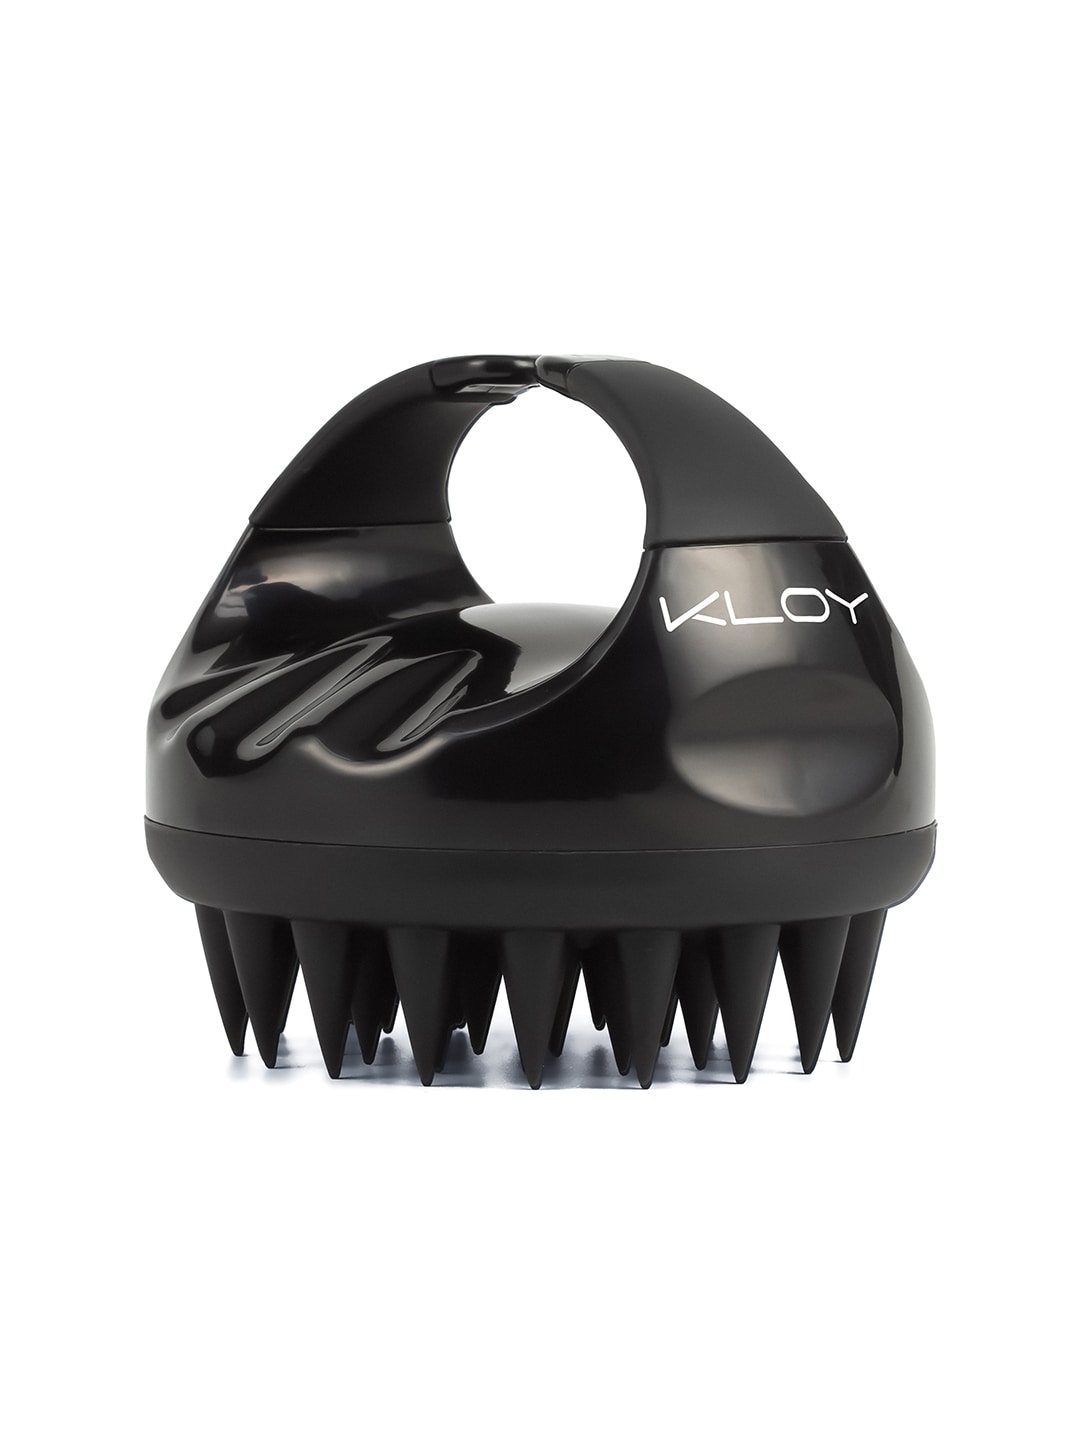 KLOY Black Hair Scalp Massager Exfoliator Shampoo Brush With Soft Silicone Bristles Price in India